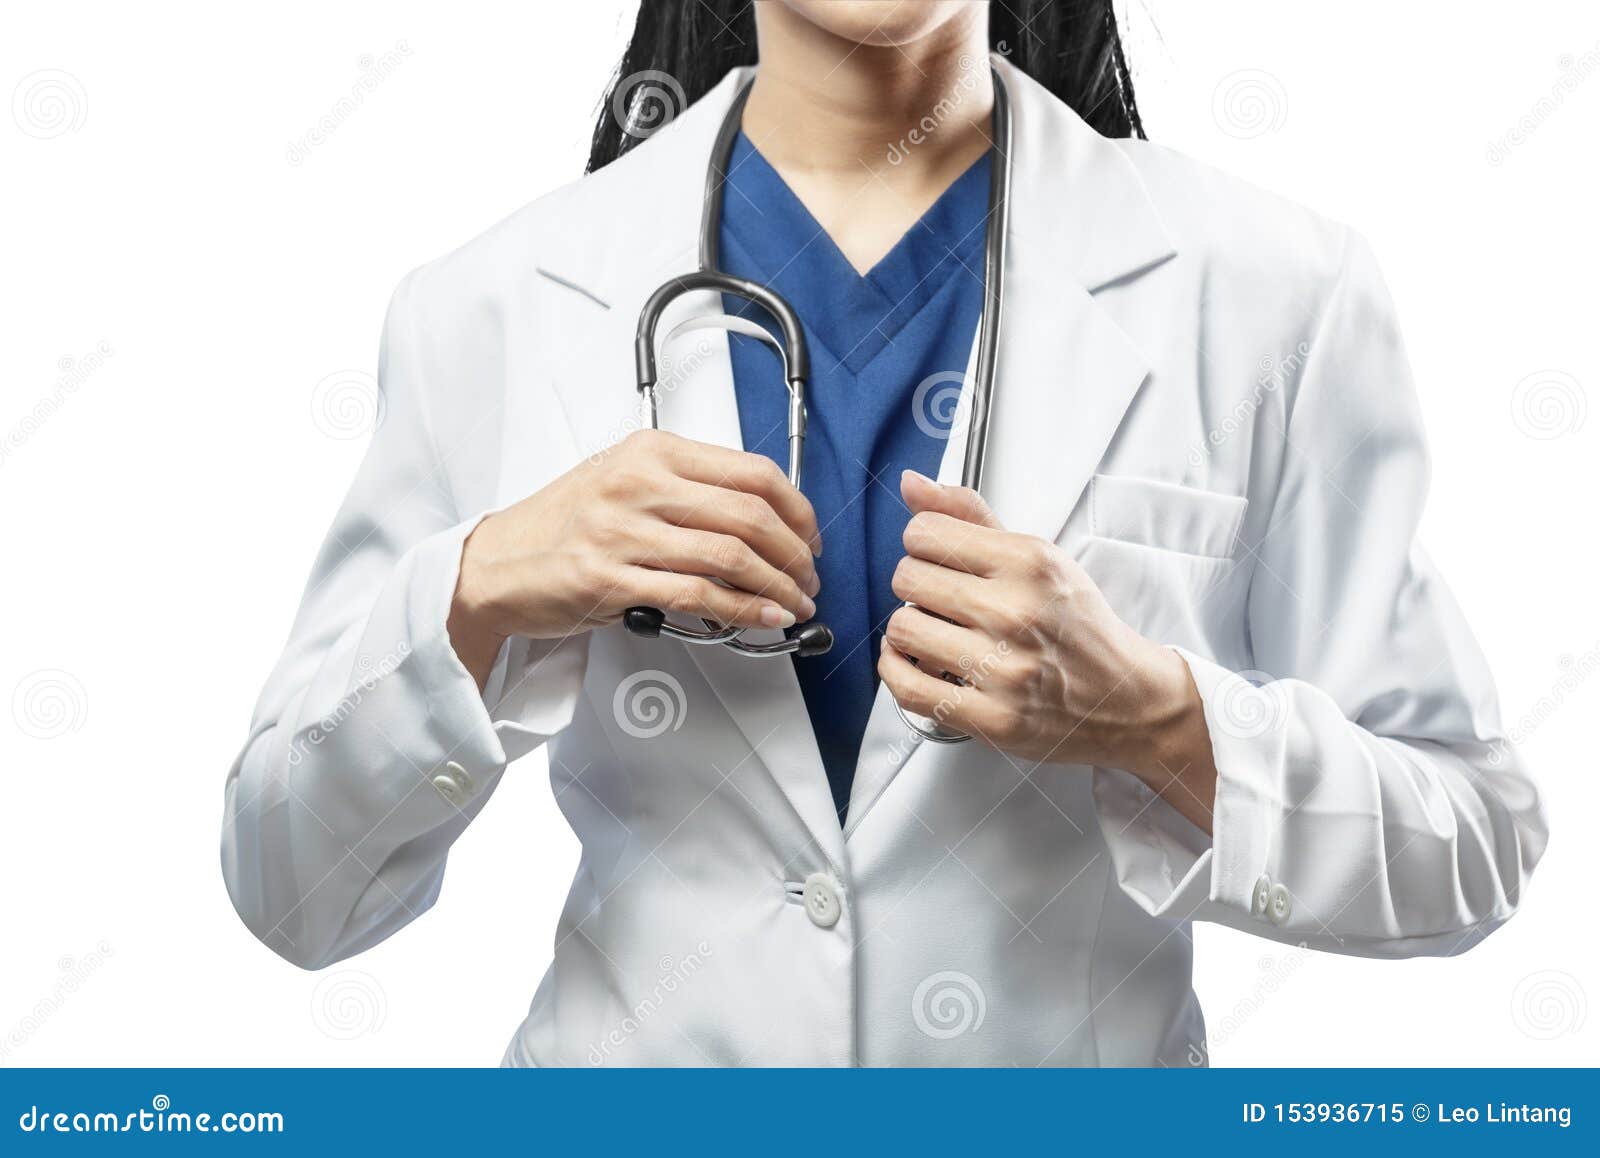 Woman Doctor In A White Lab Coat Holding Stethoscope On Her Hands Stock